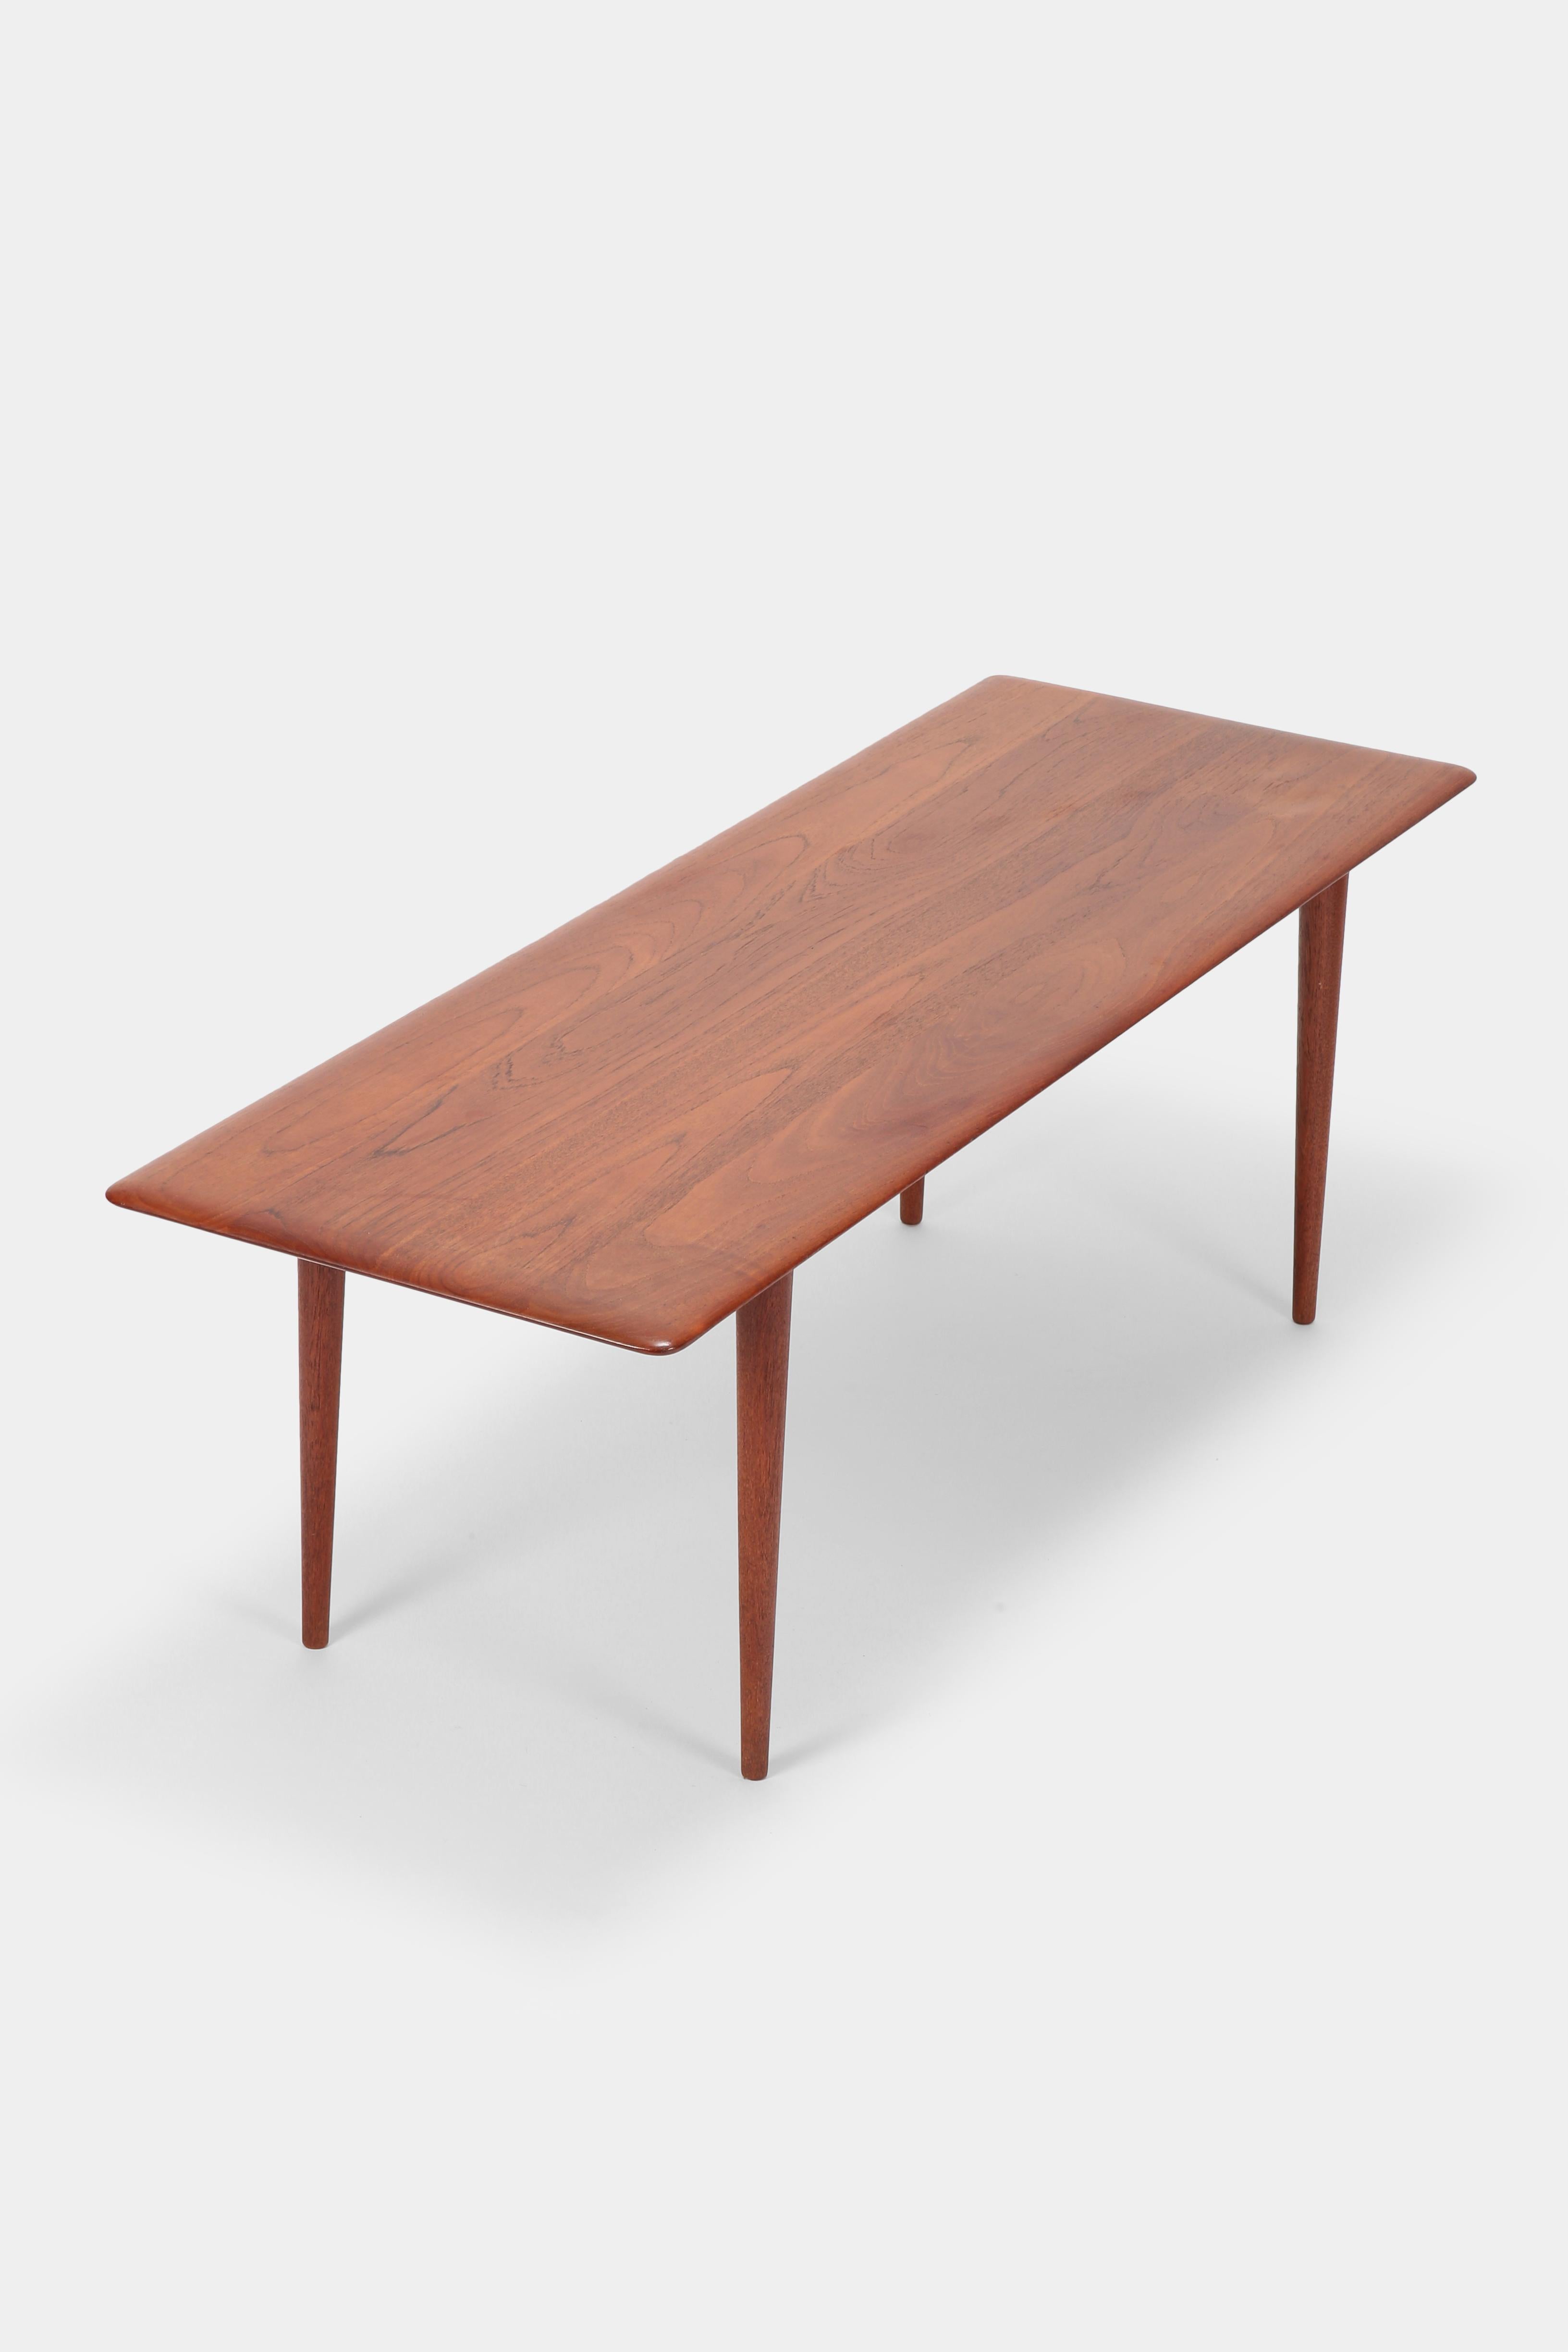 Peter Hvidt & Orla Mølgaard Nielsen FD 516 coffee table manufactured by France & Son in the 1960s in Denmark. Beautiful solid teak wood coffee table. The surface is new oiled. Stamp of the manufacturer on the bottom.